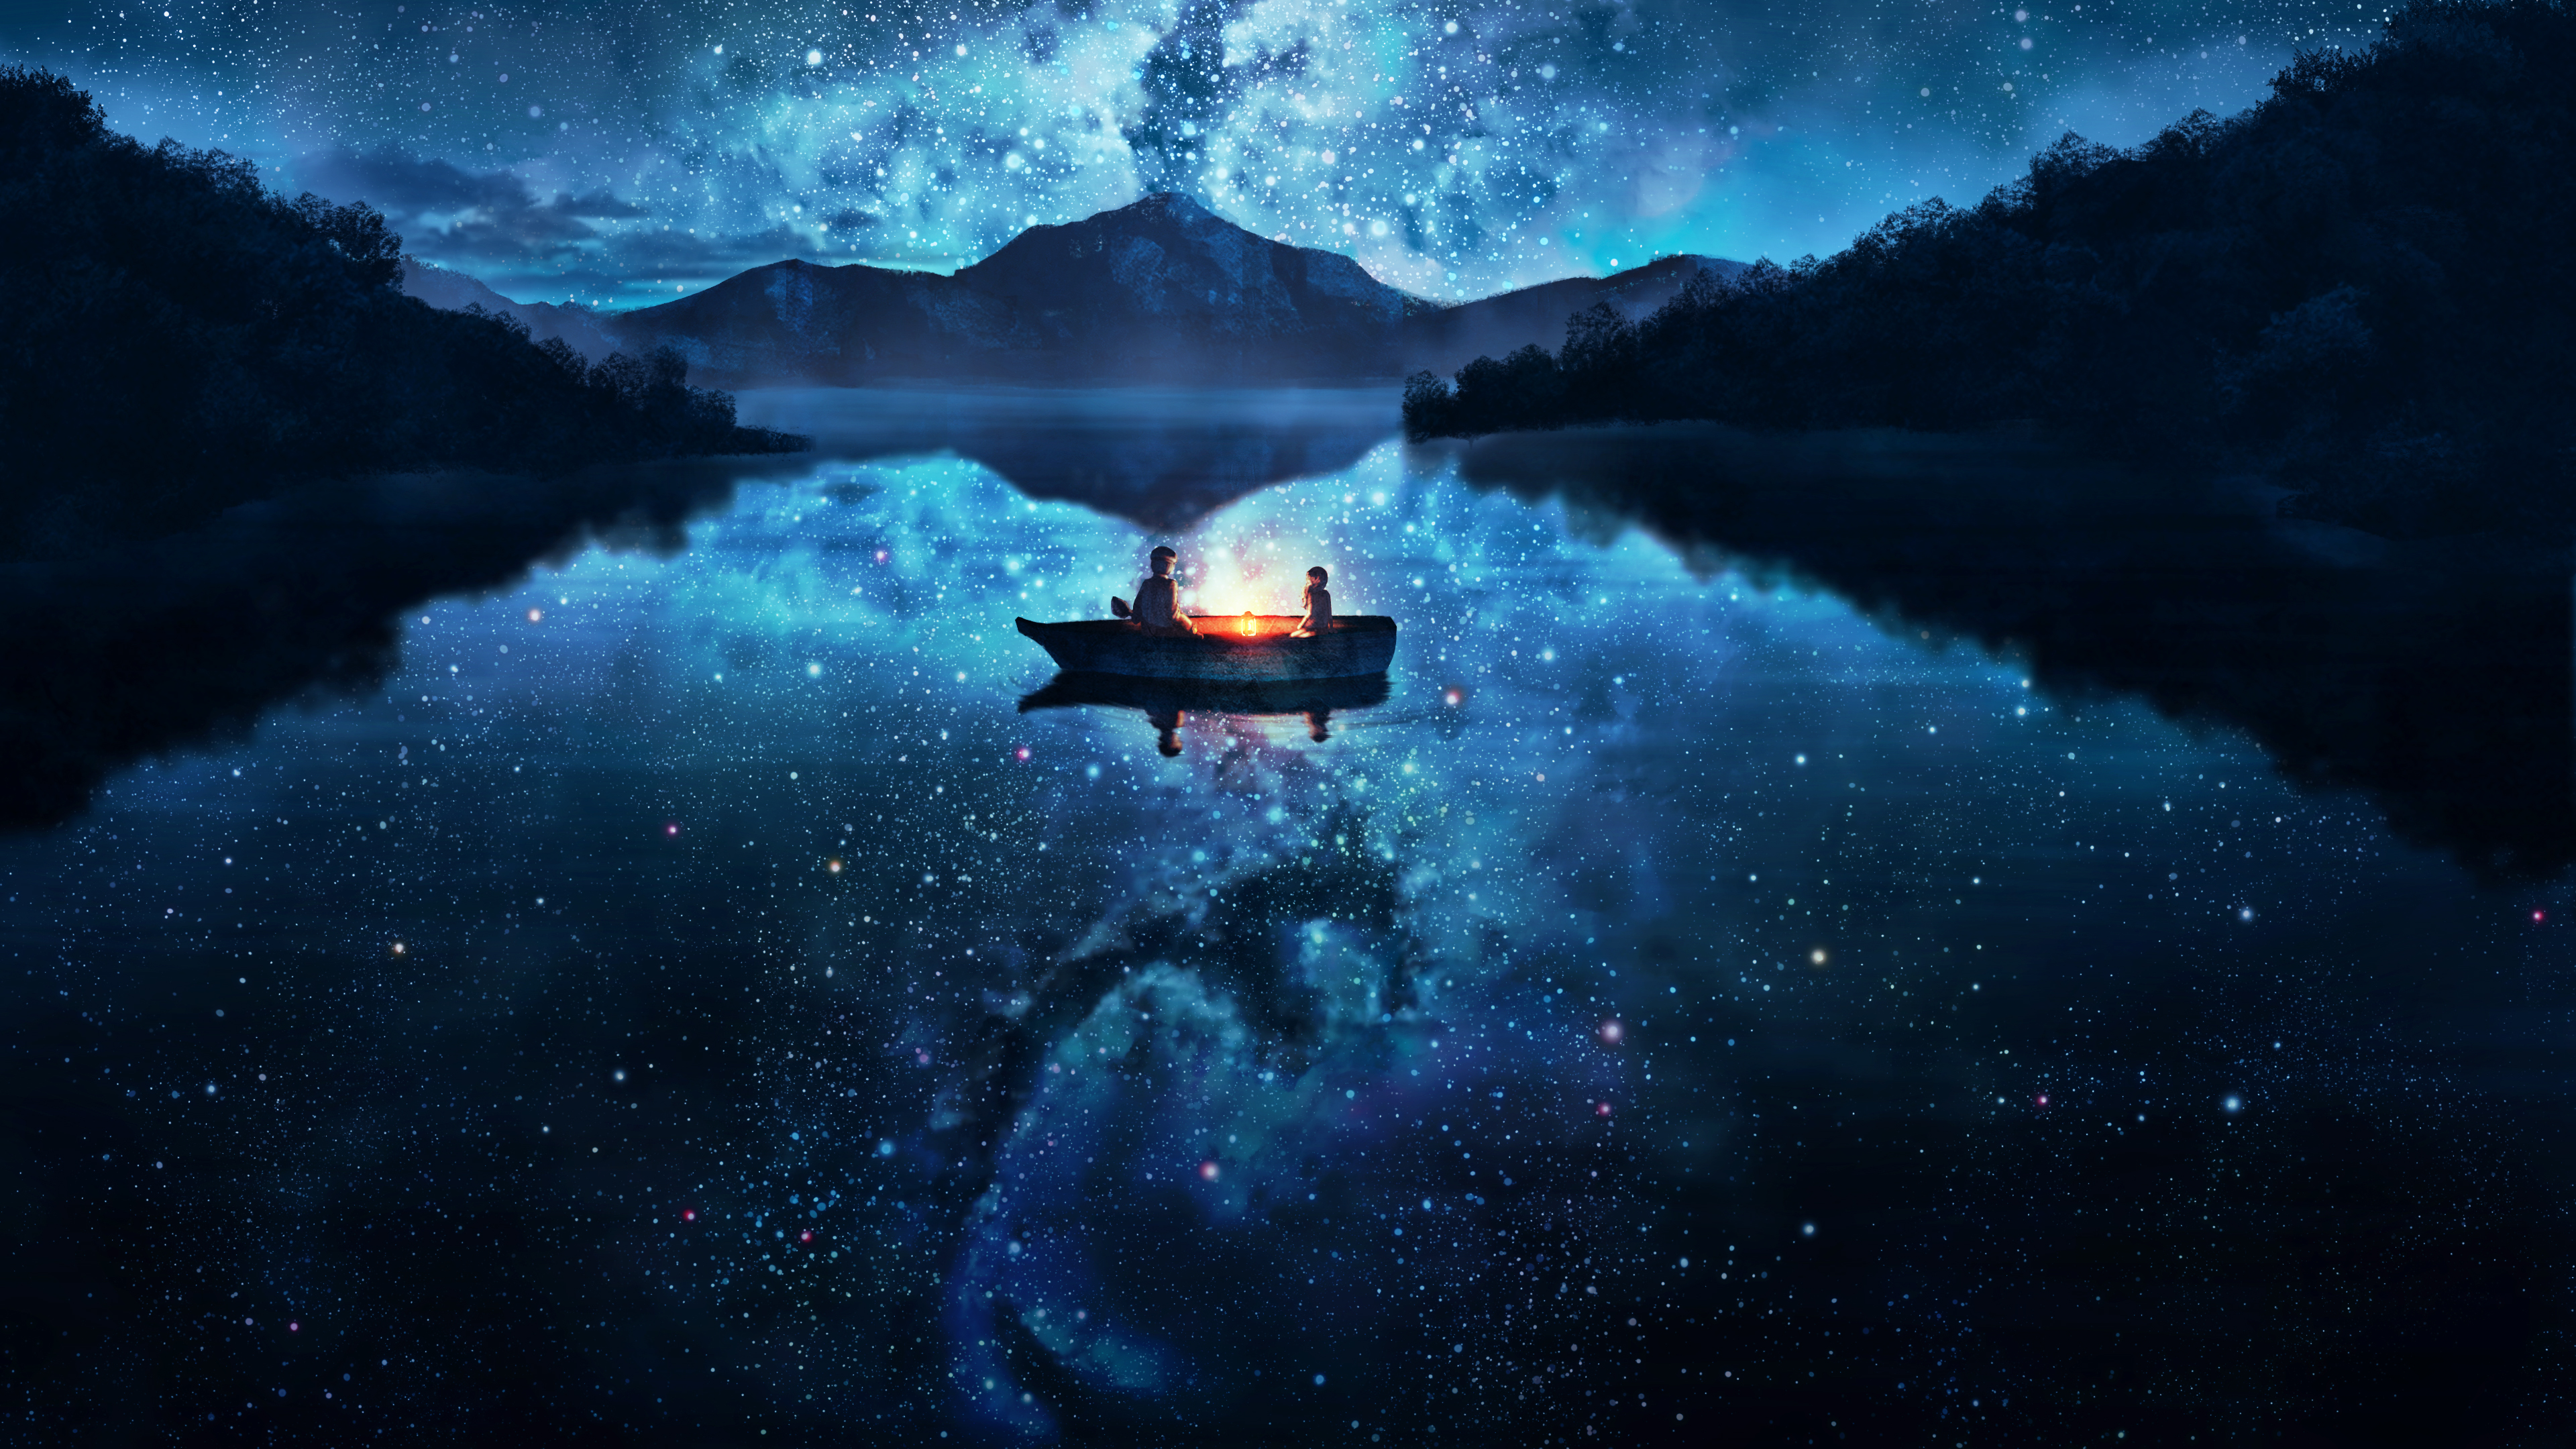 Free Backgrounds starry sky, boat, scenic, night